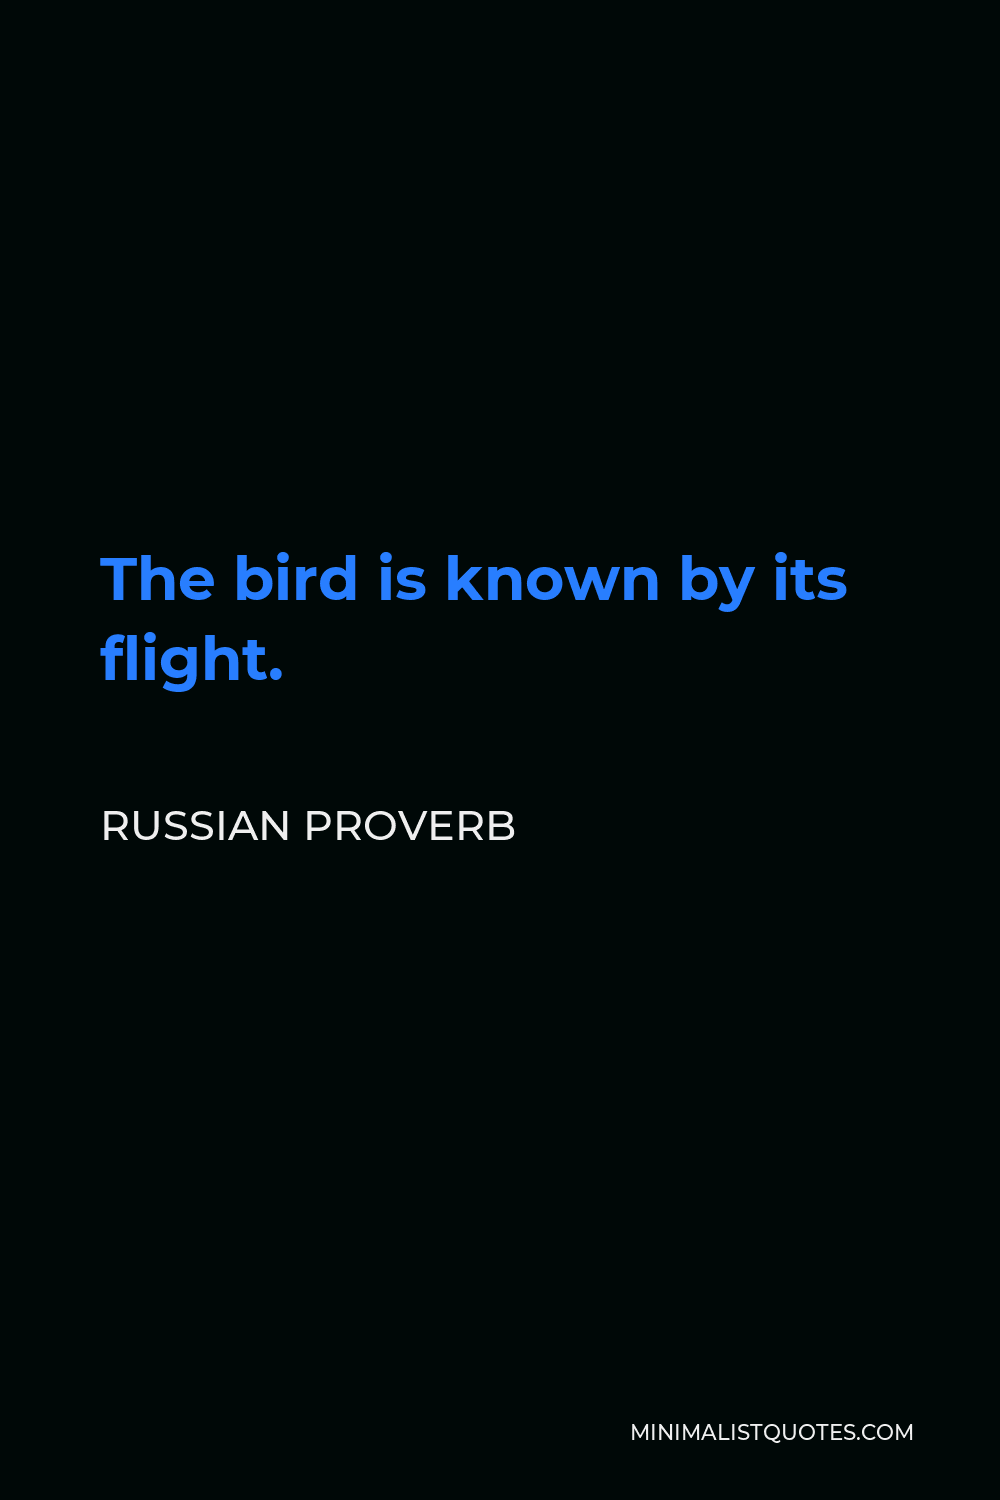 Russian Proverb Quote - The bird is known by its flight.